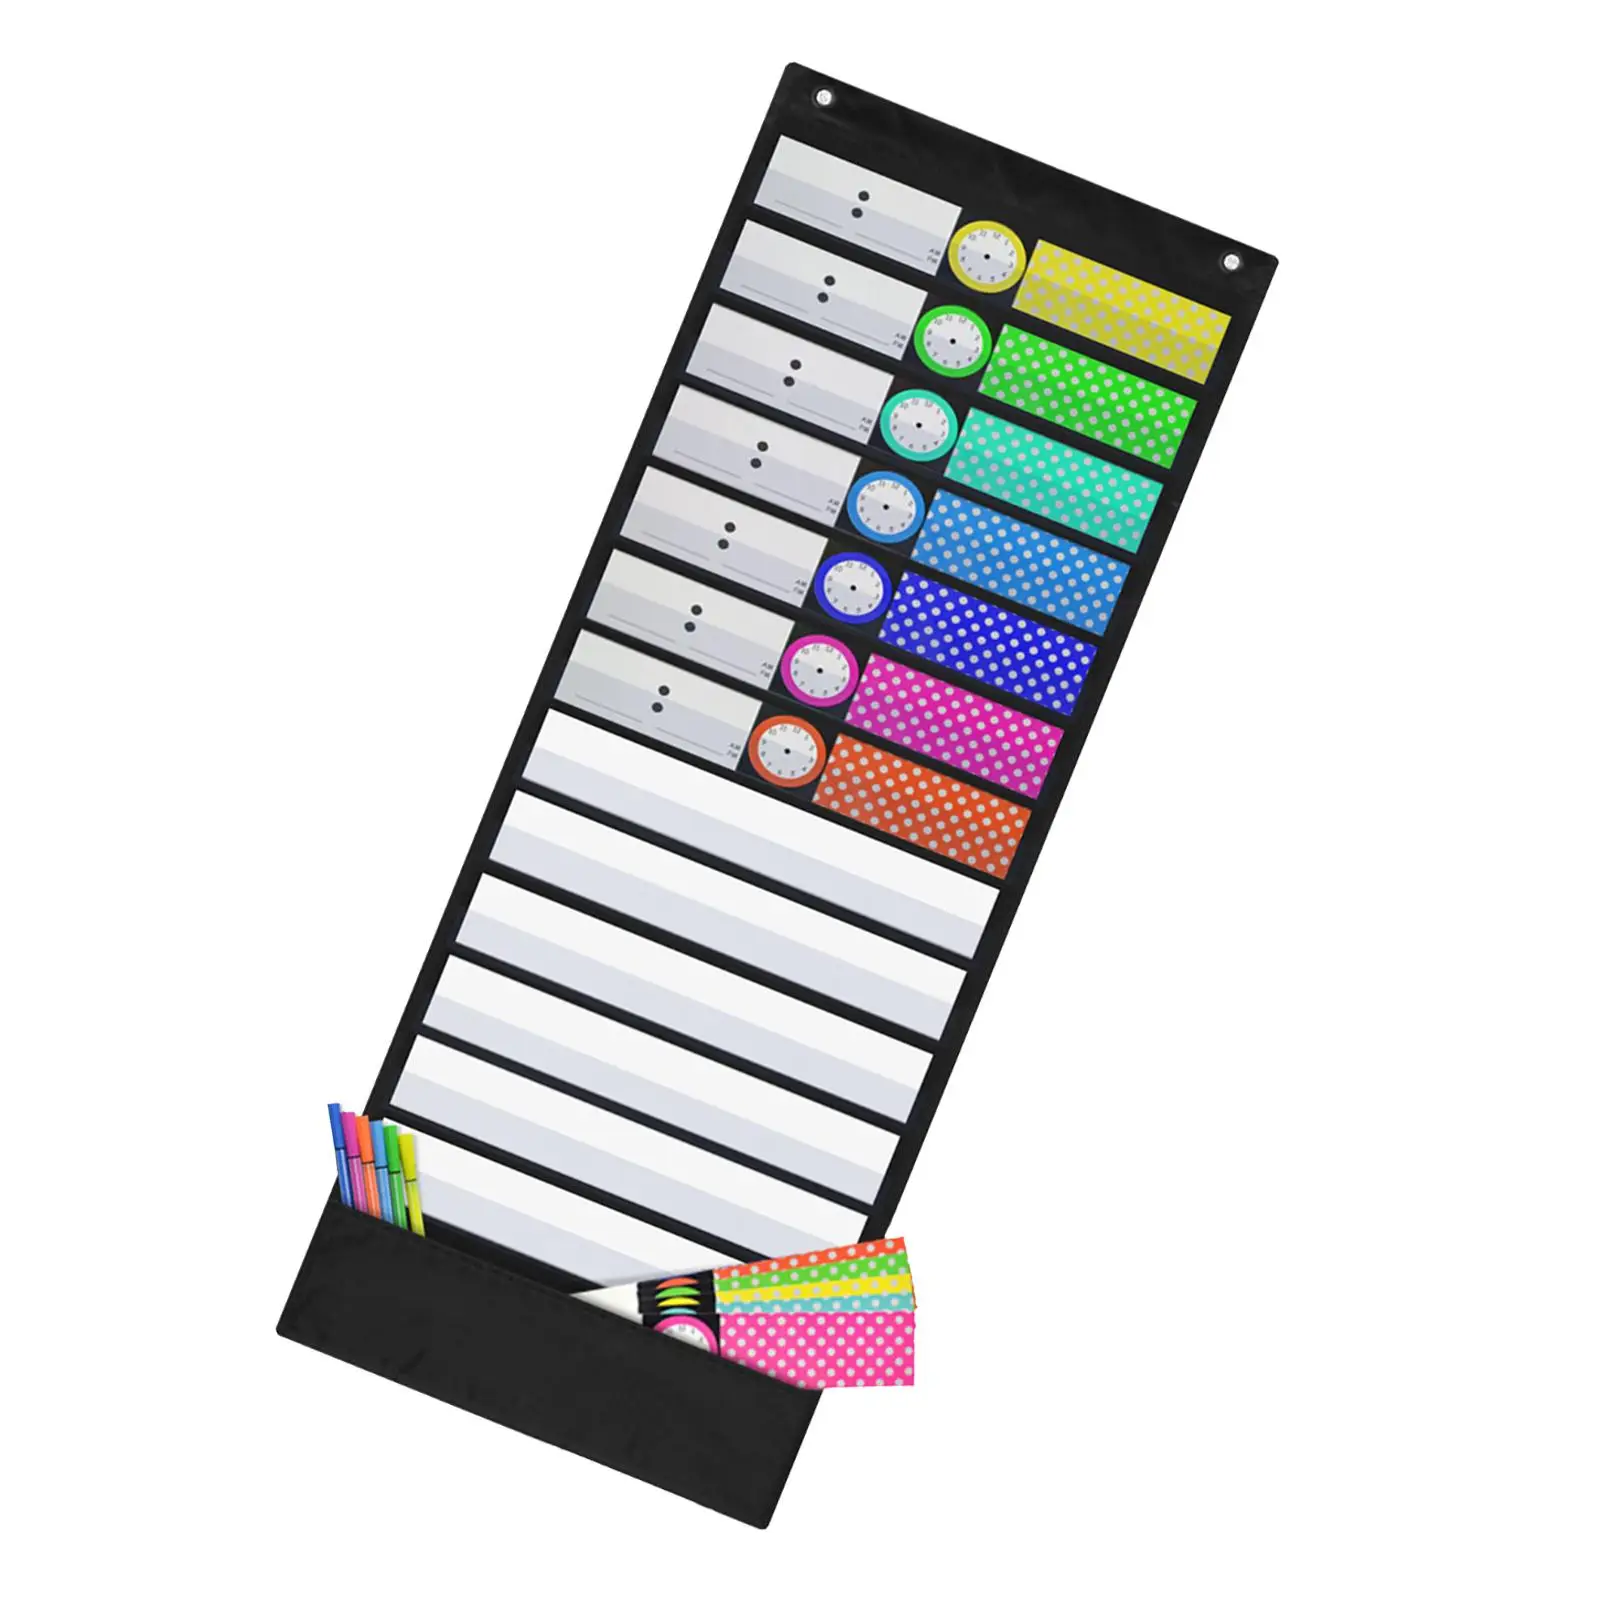 Hanging Daily Schedule Pocket Chart with Cards Wall File Organizer for Indoor Office